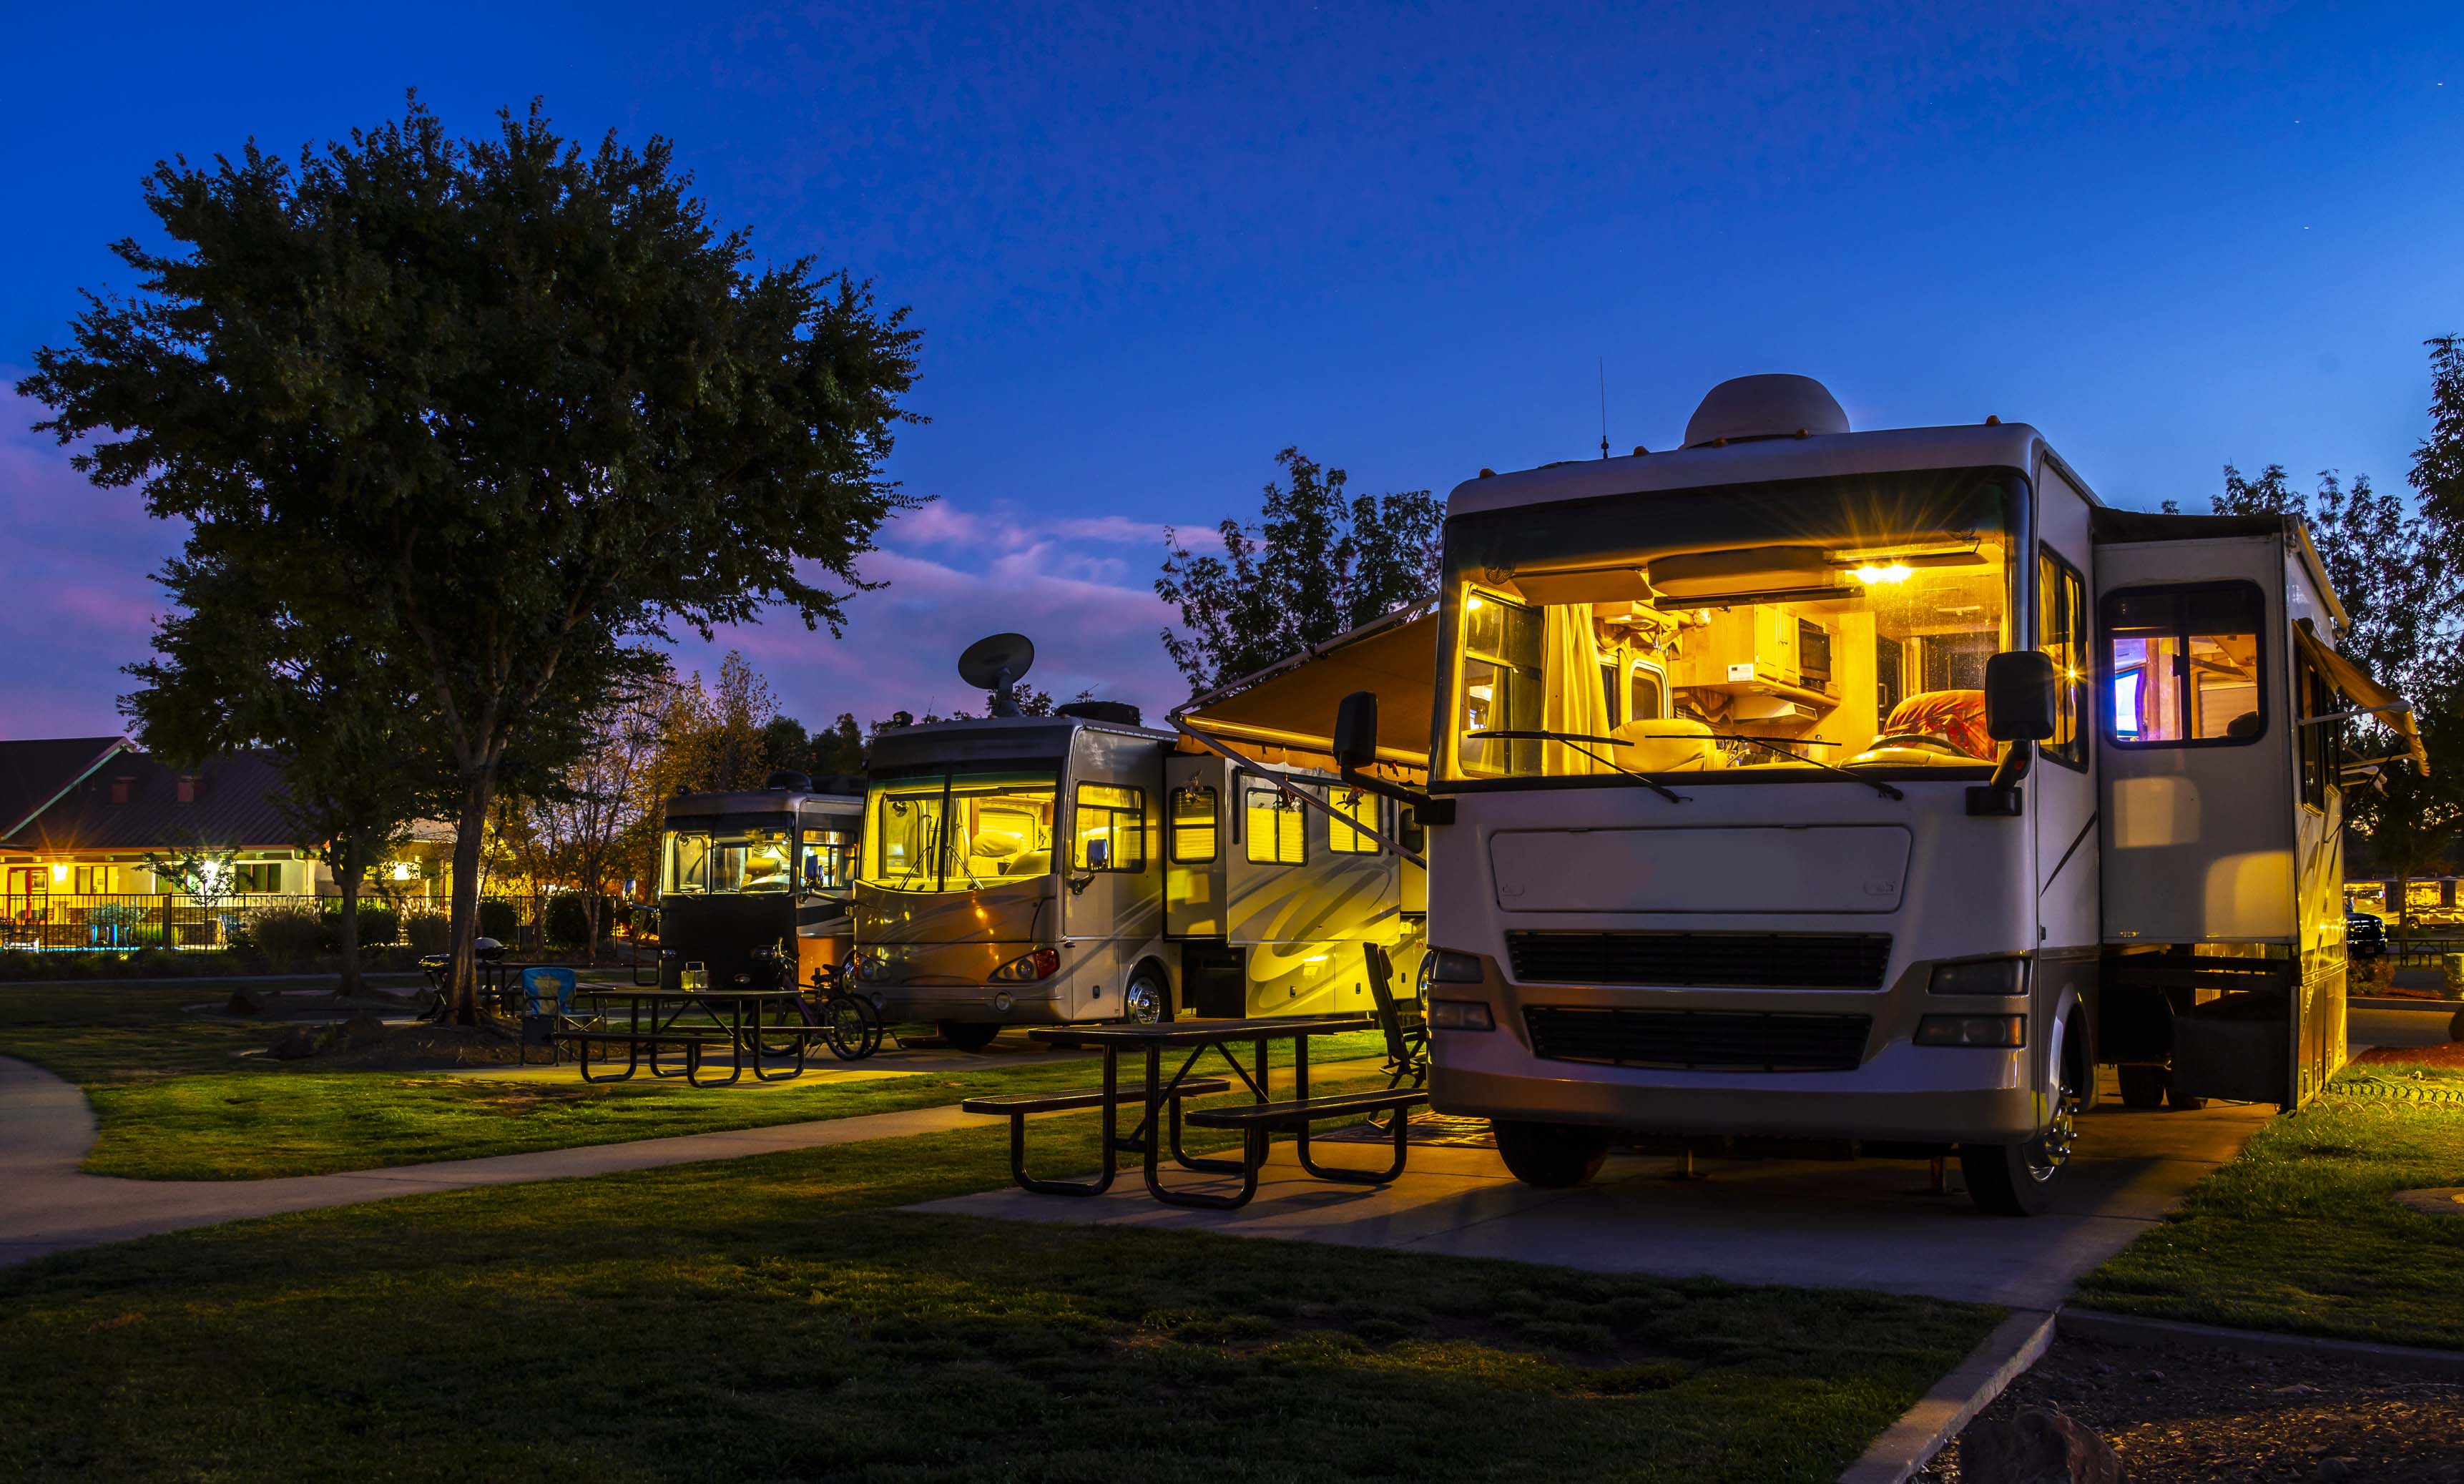 RVs in the evening with lights on.